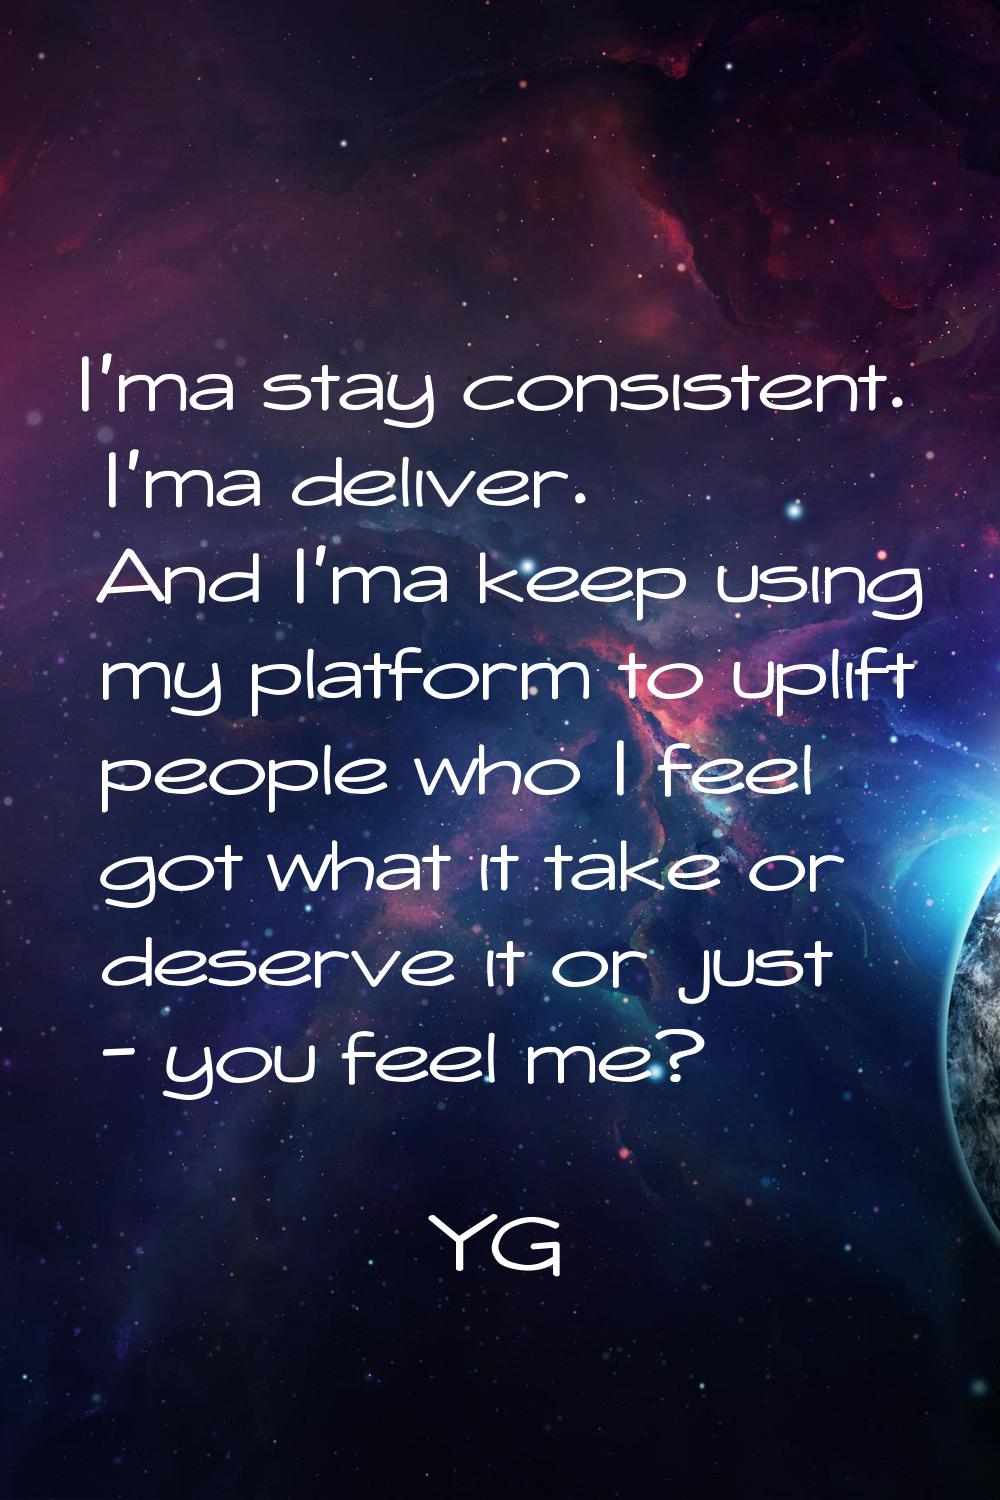 I'ma stay consistent. I'ma deliver. And I'ma keep using my platform to uplift people who I feel got